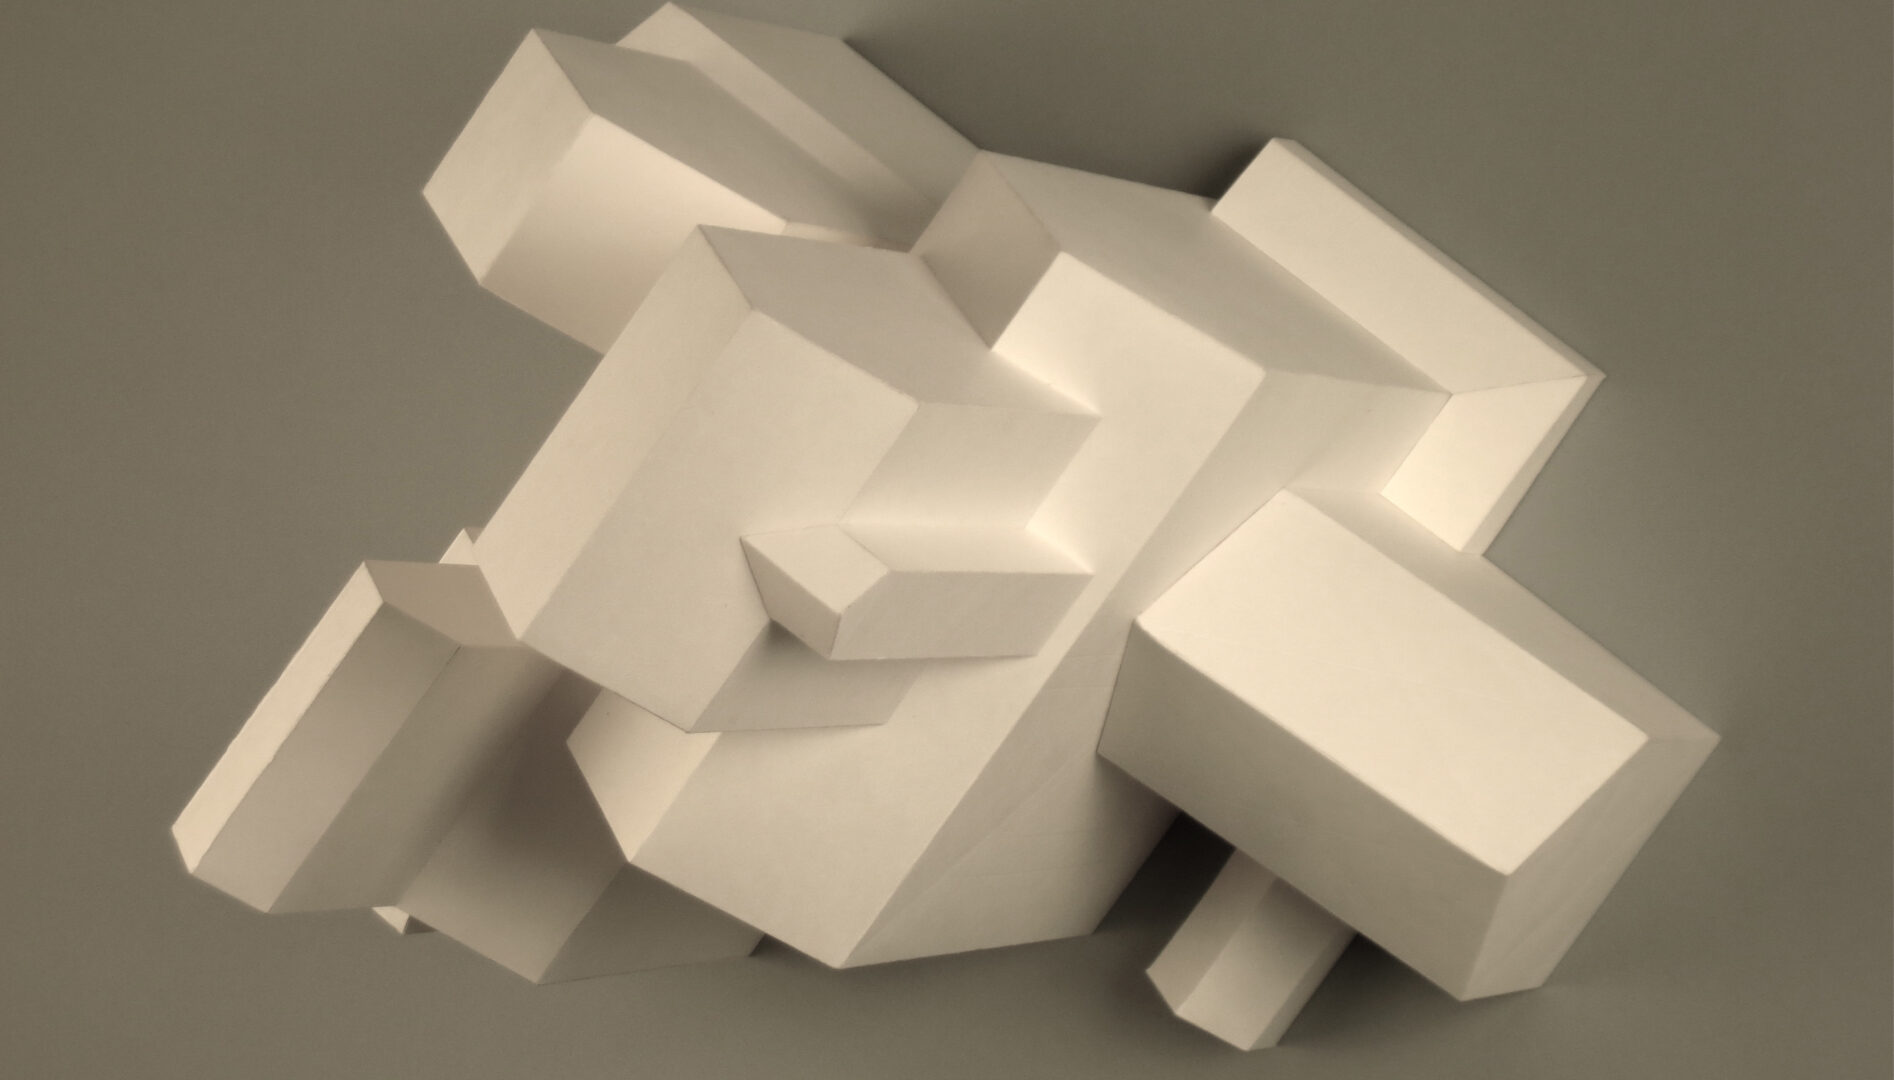 Abstract white geometric sculpture